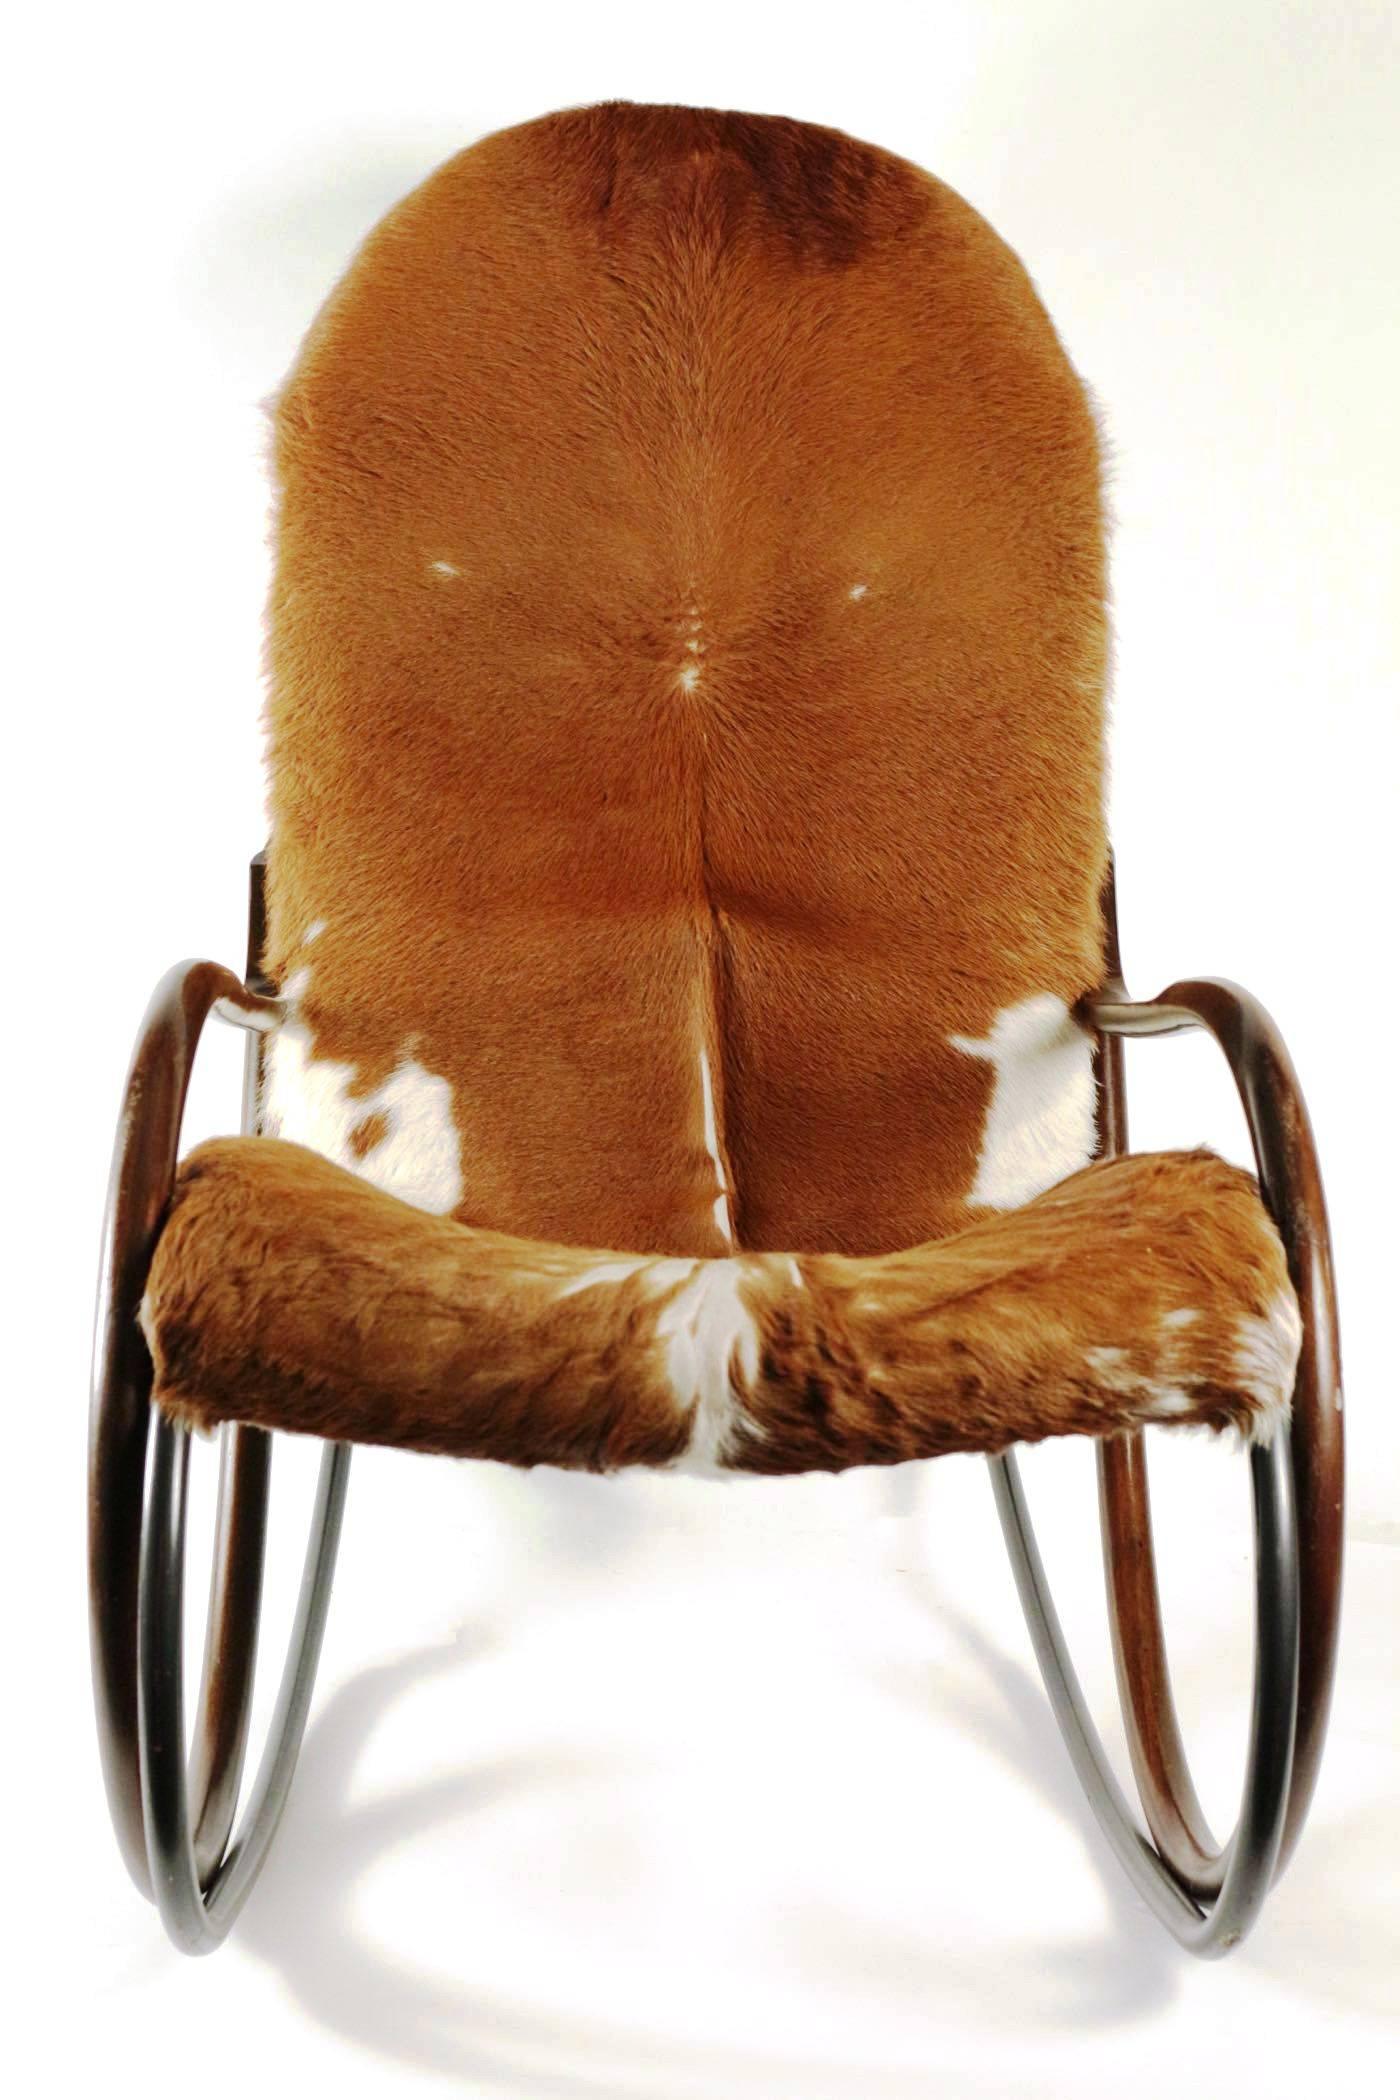 Late 20th Century Rare and Original Nonna Rocking Chair, Paul Tuttle for Strassle, 1972 Cow Skin